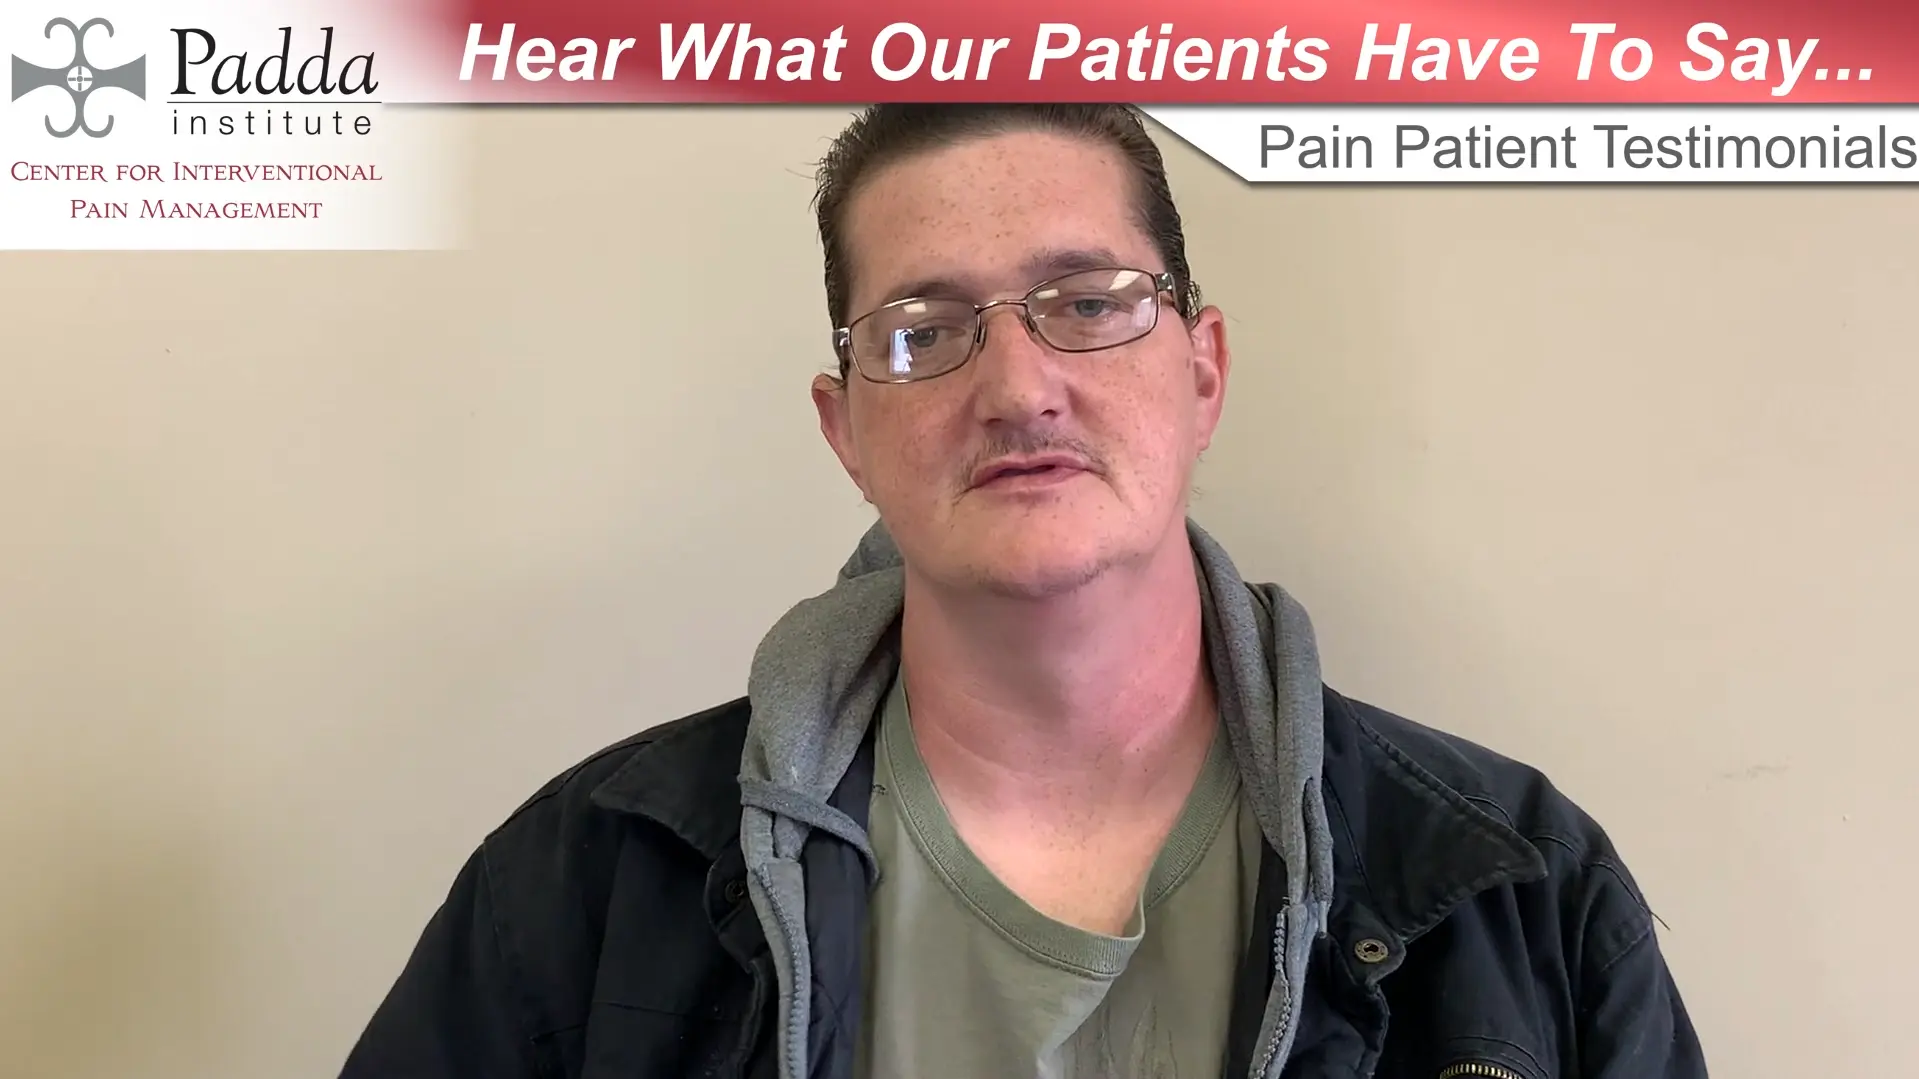 Patient Story: Conquering Pain with Our Help - Padda Institute